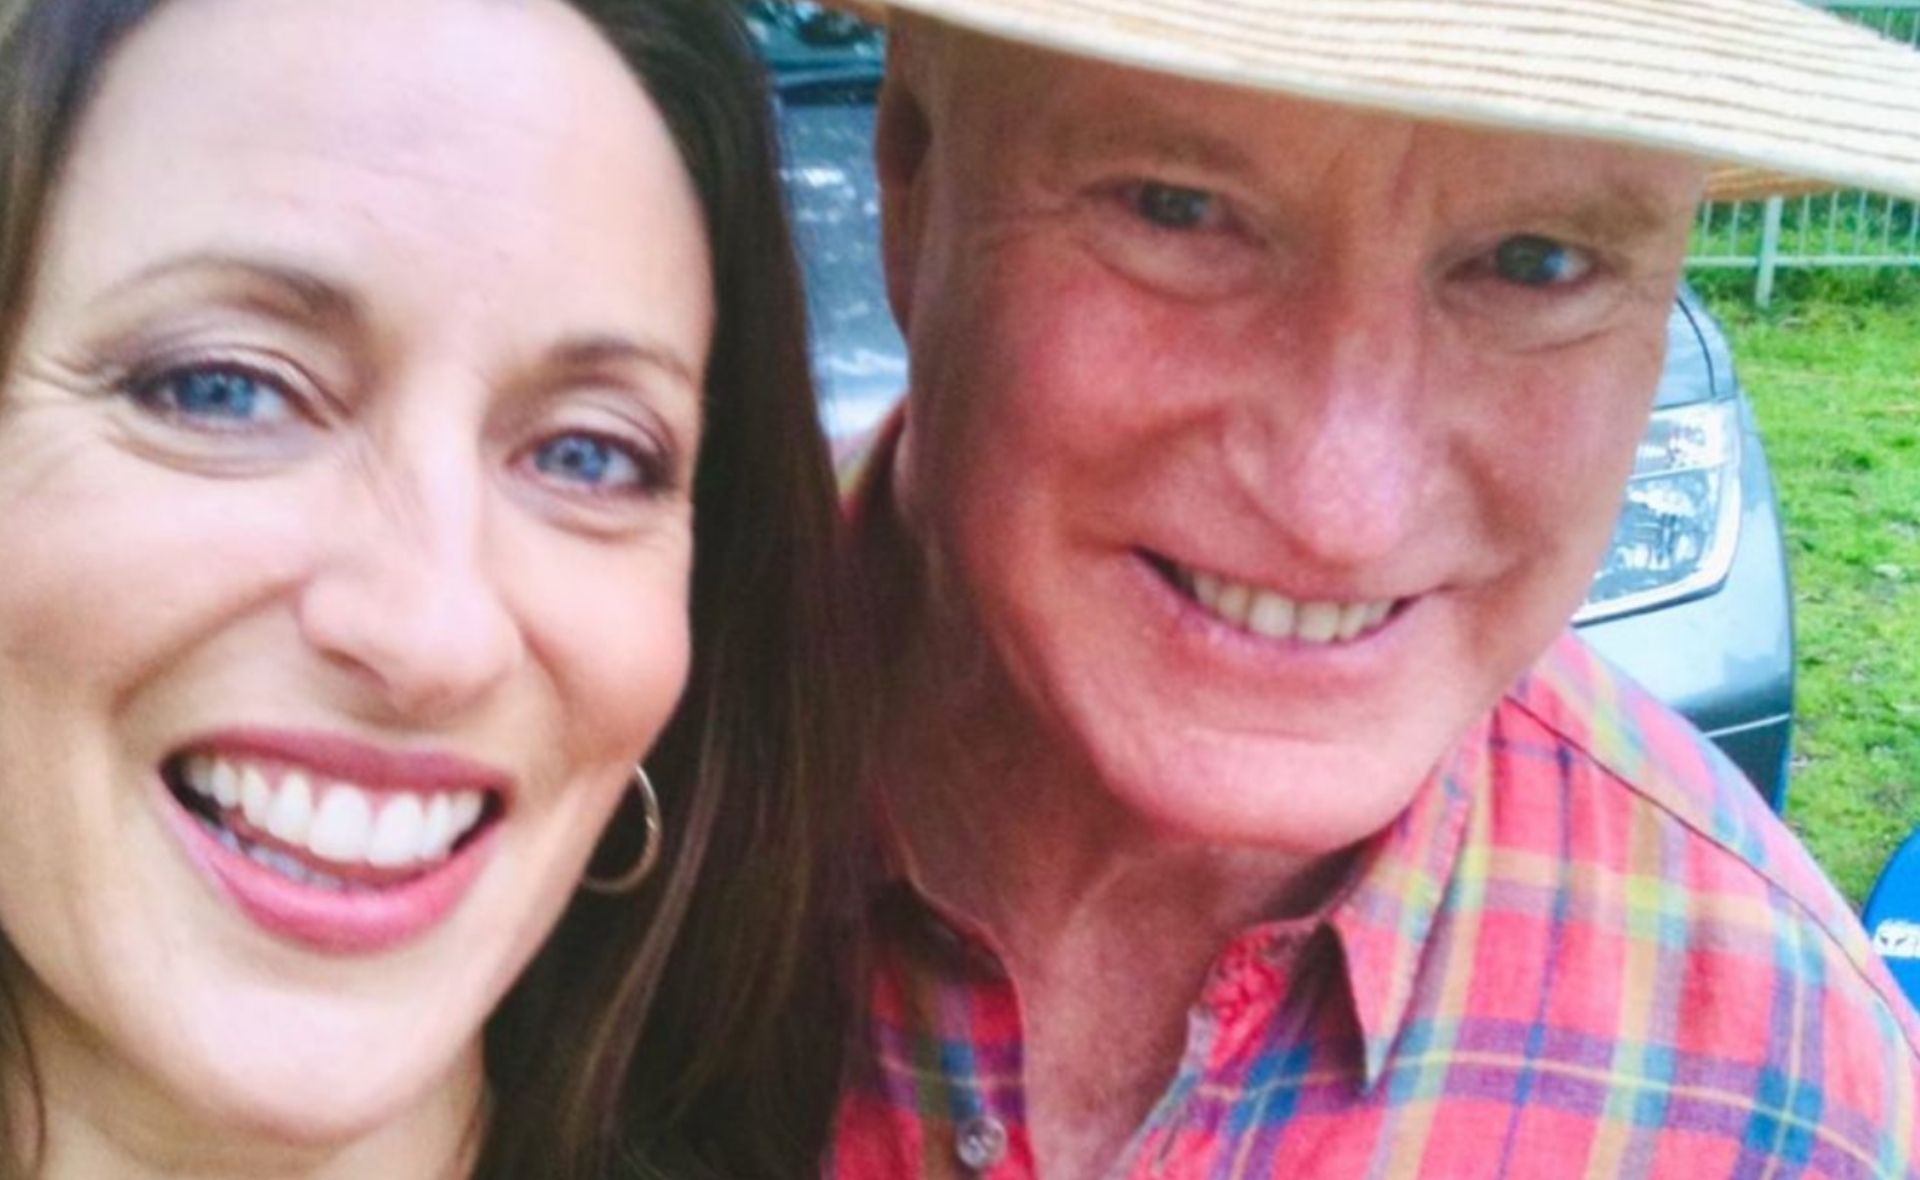 Home and Away’s Georgie Parker shares a gritty and dishevelled throwback with Ray Meagher